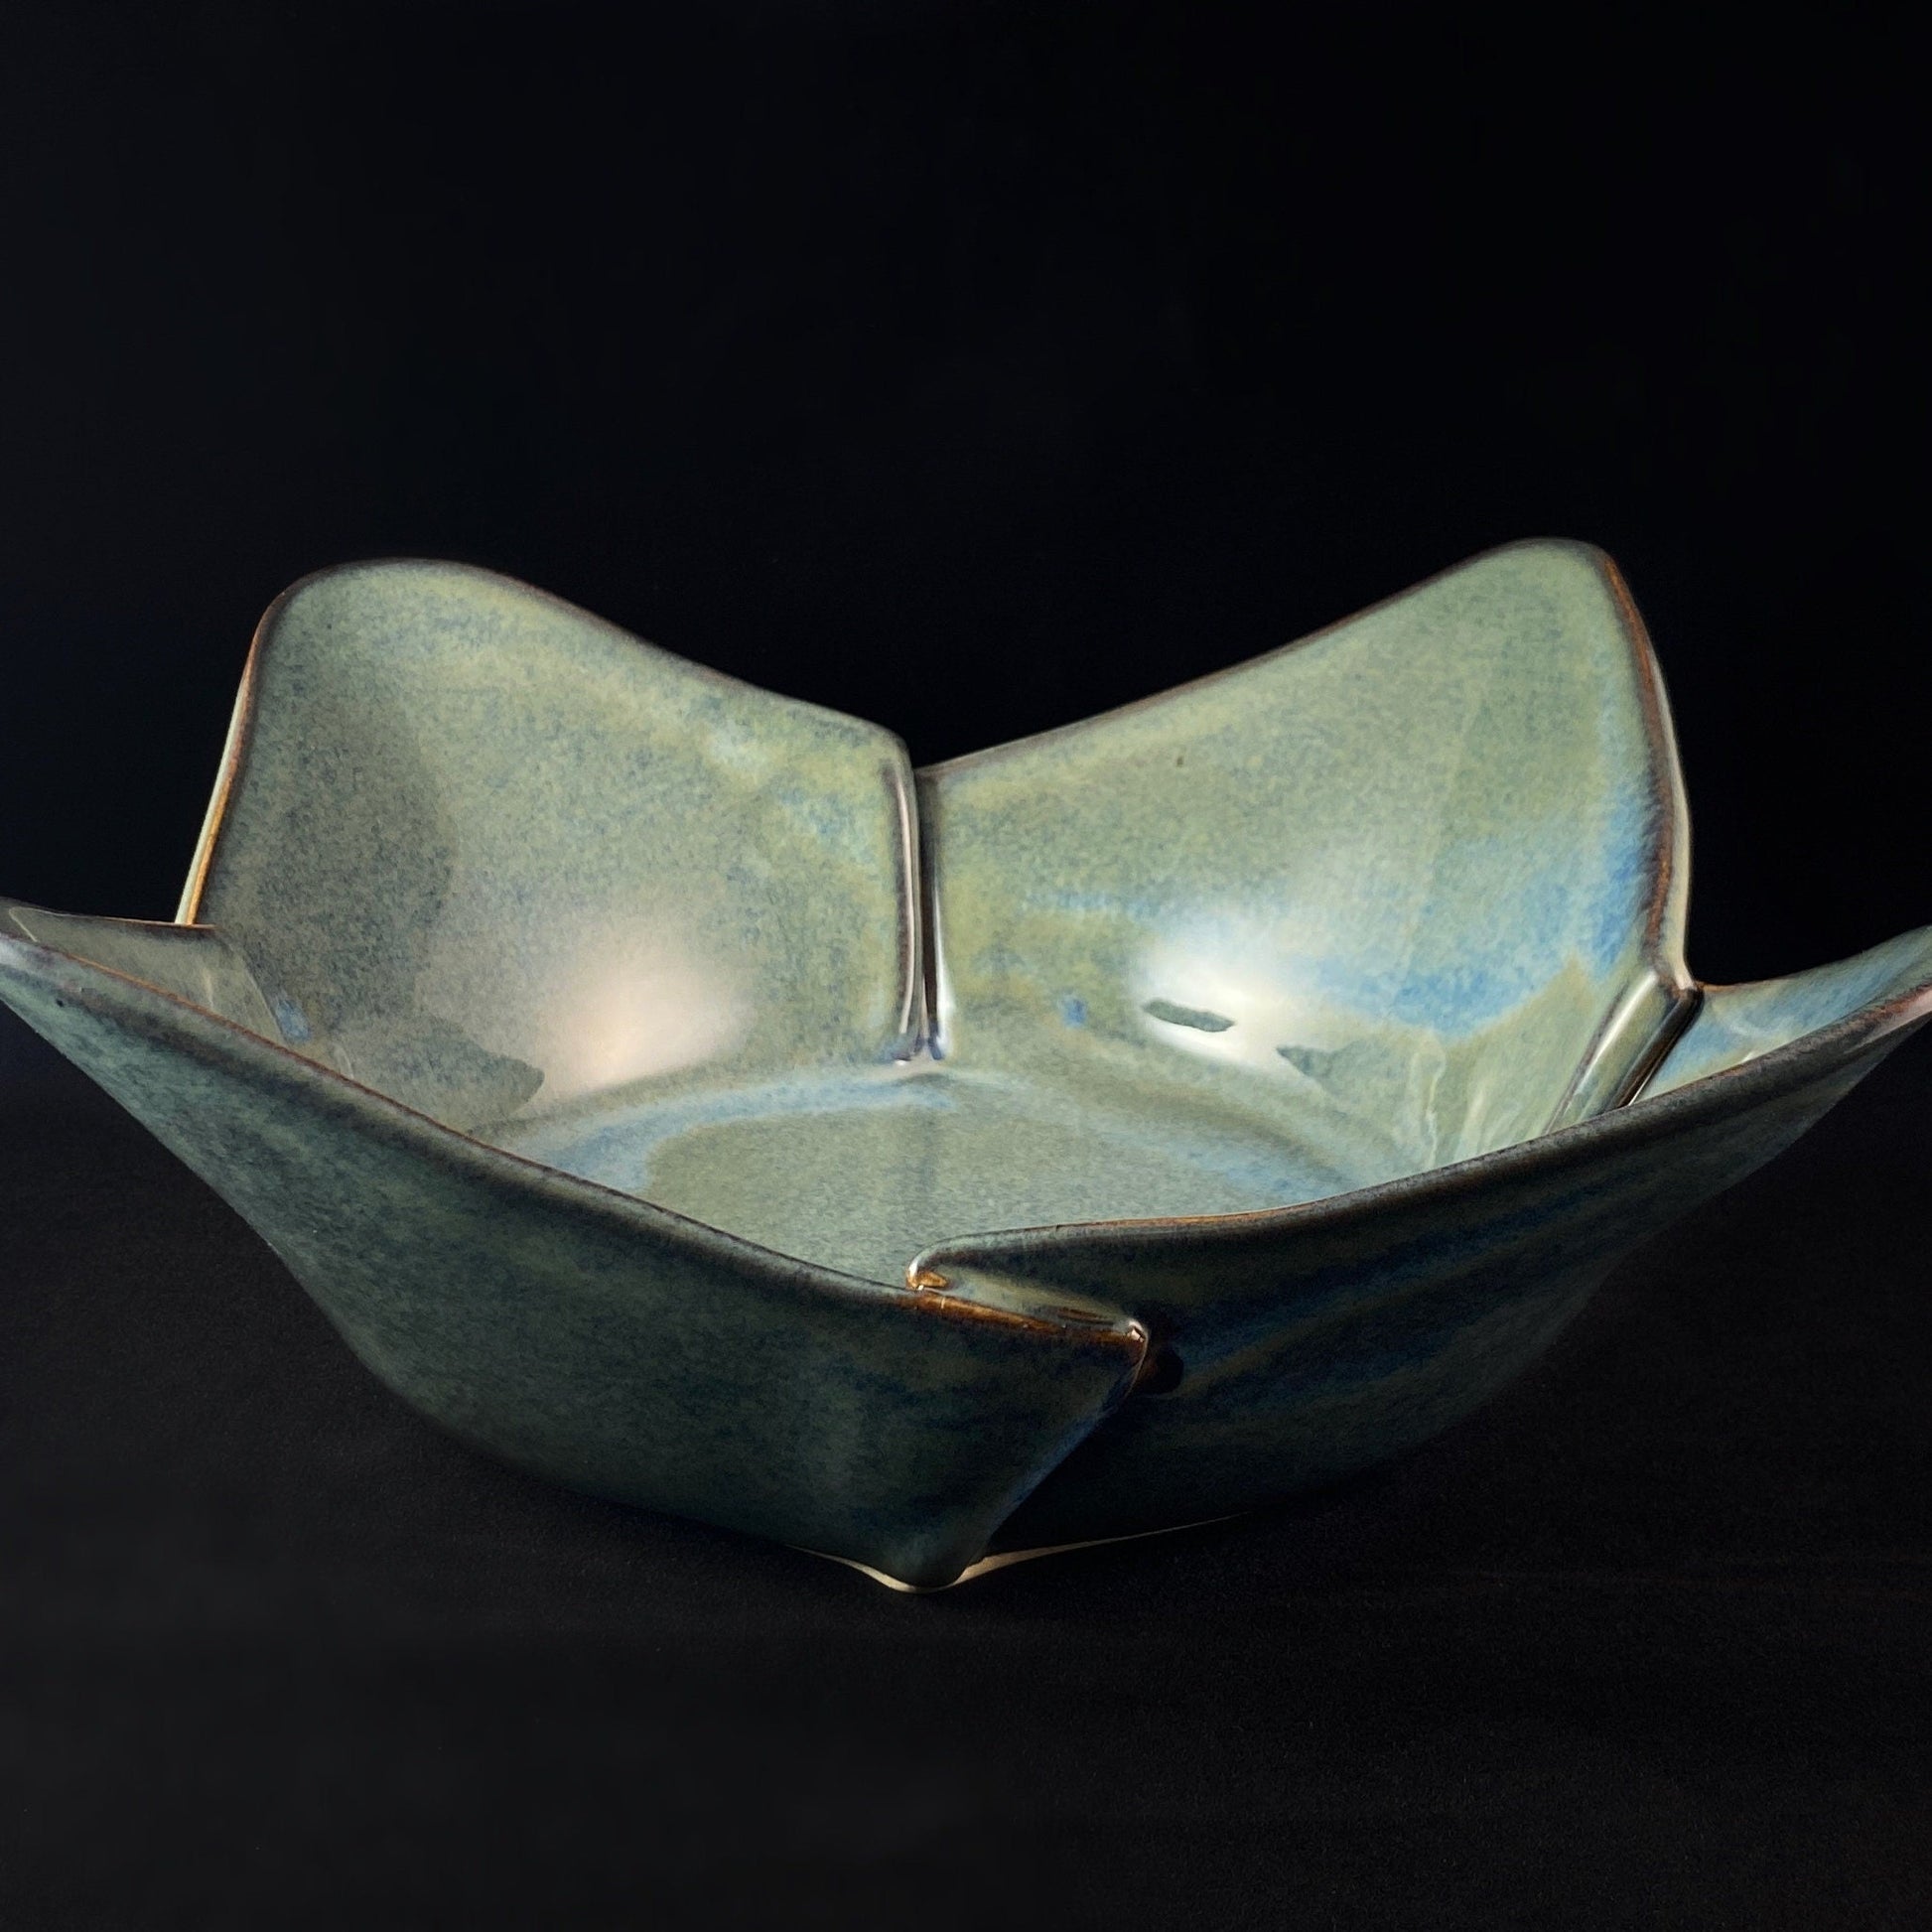 Handmade Square Bowl with Serving Spoons, Functional and Decorative Pottery